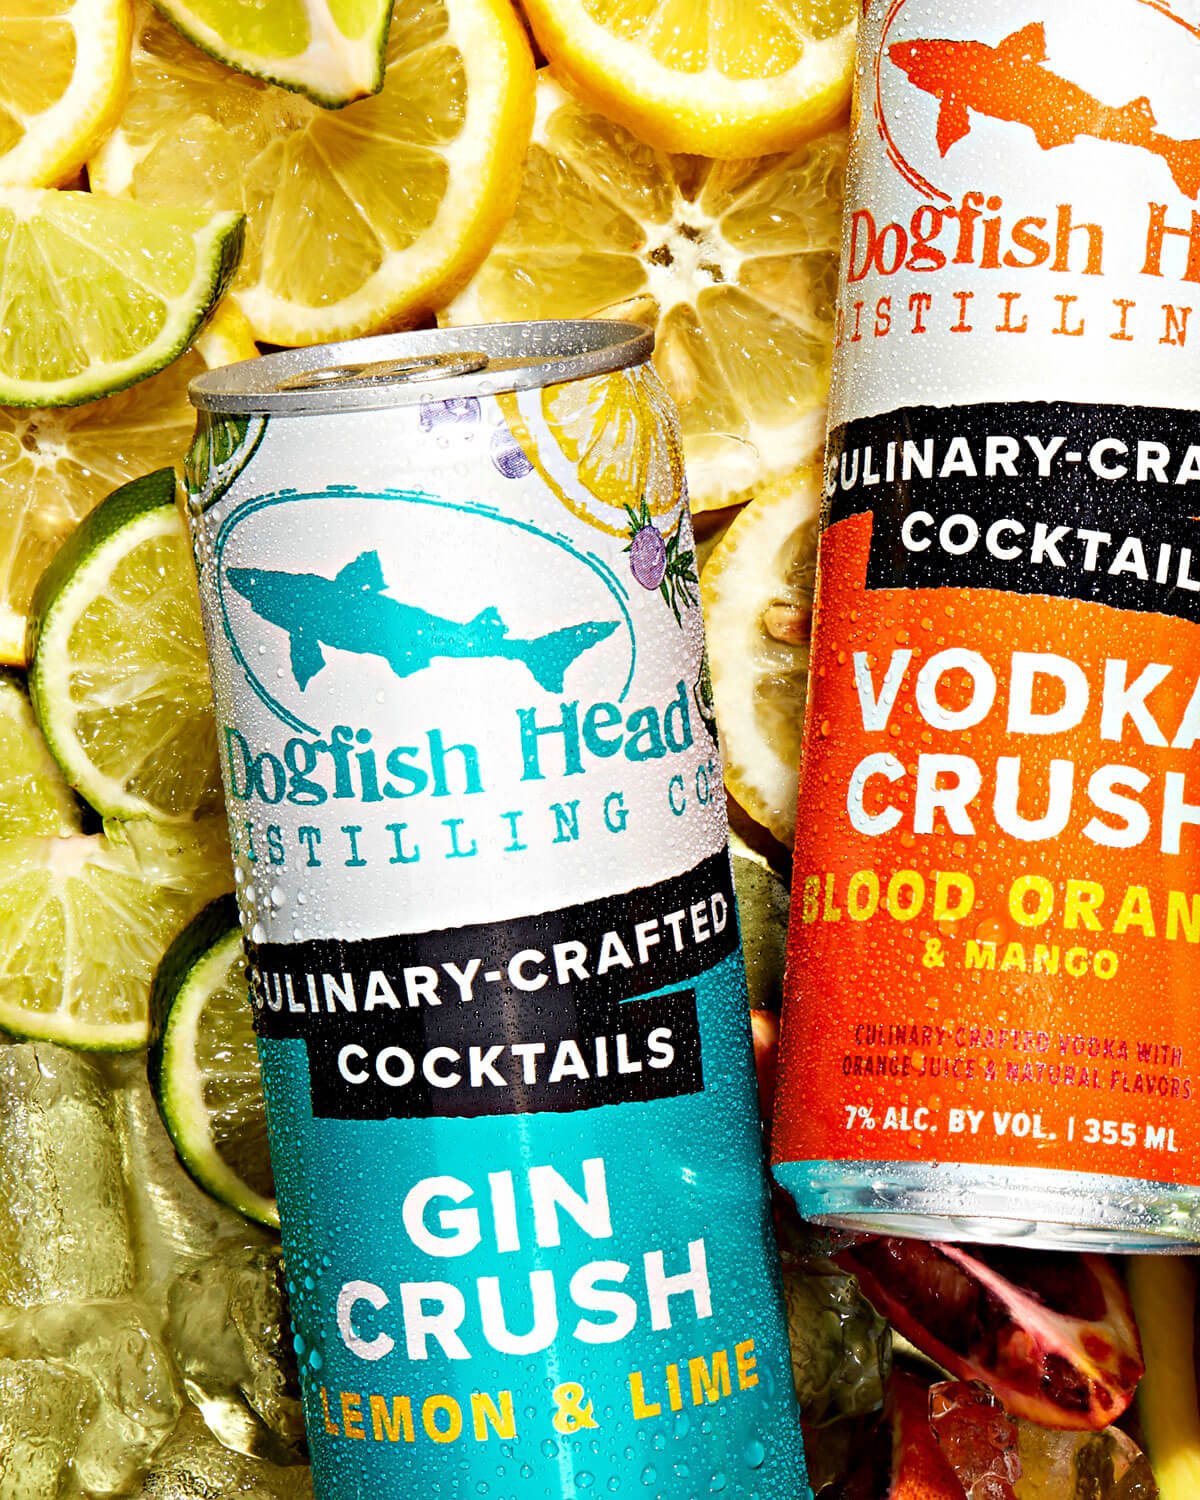 Moxie-Sozo-Dogfish-Head-Canned-Cocktails-Template-07_4x5